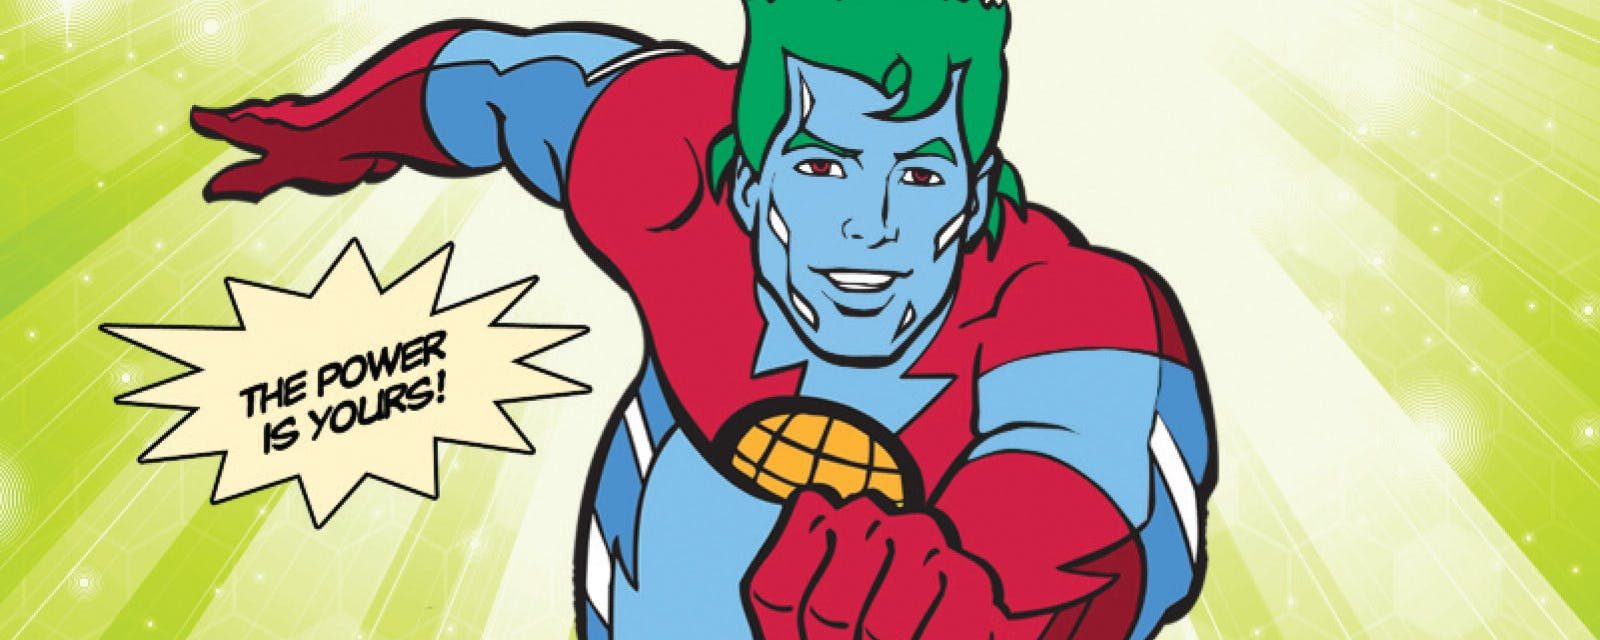 Captain Planet Has a New Team: Wind, Solar, GeoThermal, BioGas